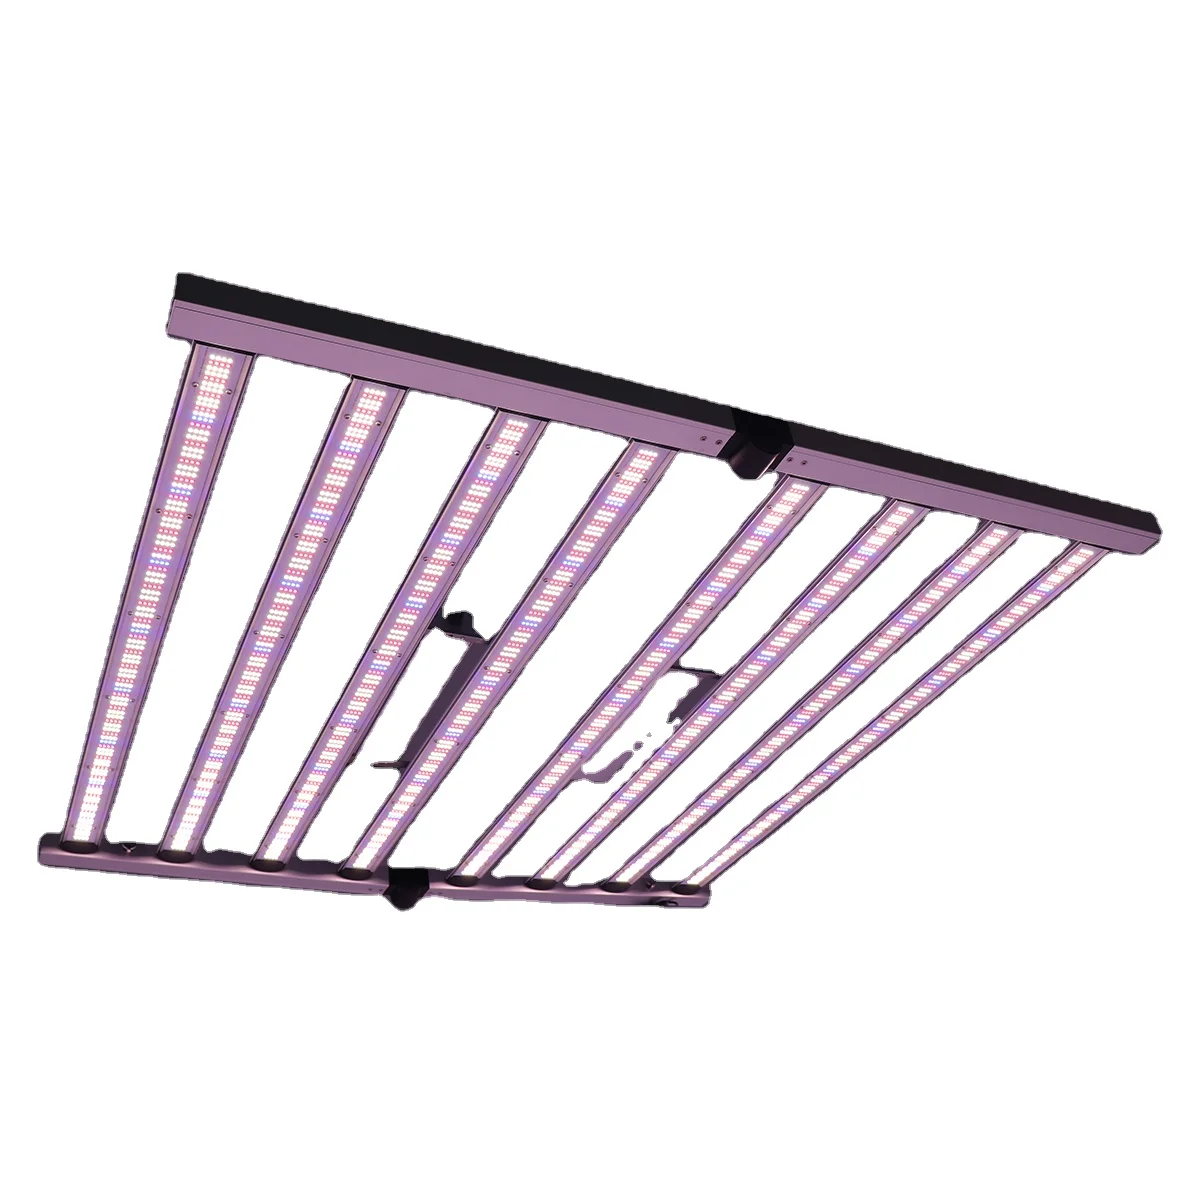 

Factory Discounted LED Grow Light 800w Full Spectrum with Dimmer for Veg Bloom Hemp Growing Vertical Farming Wholesale